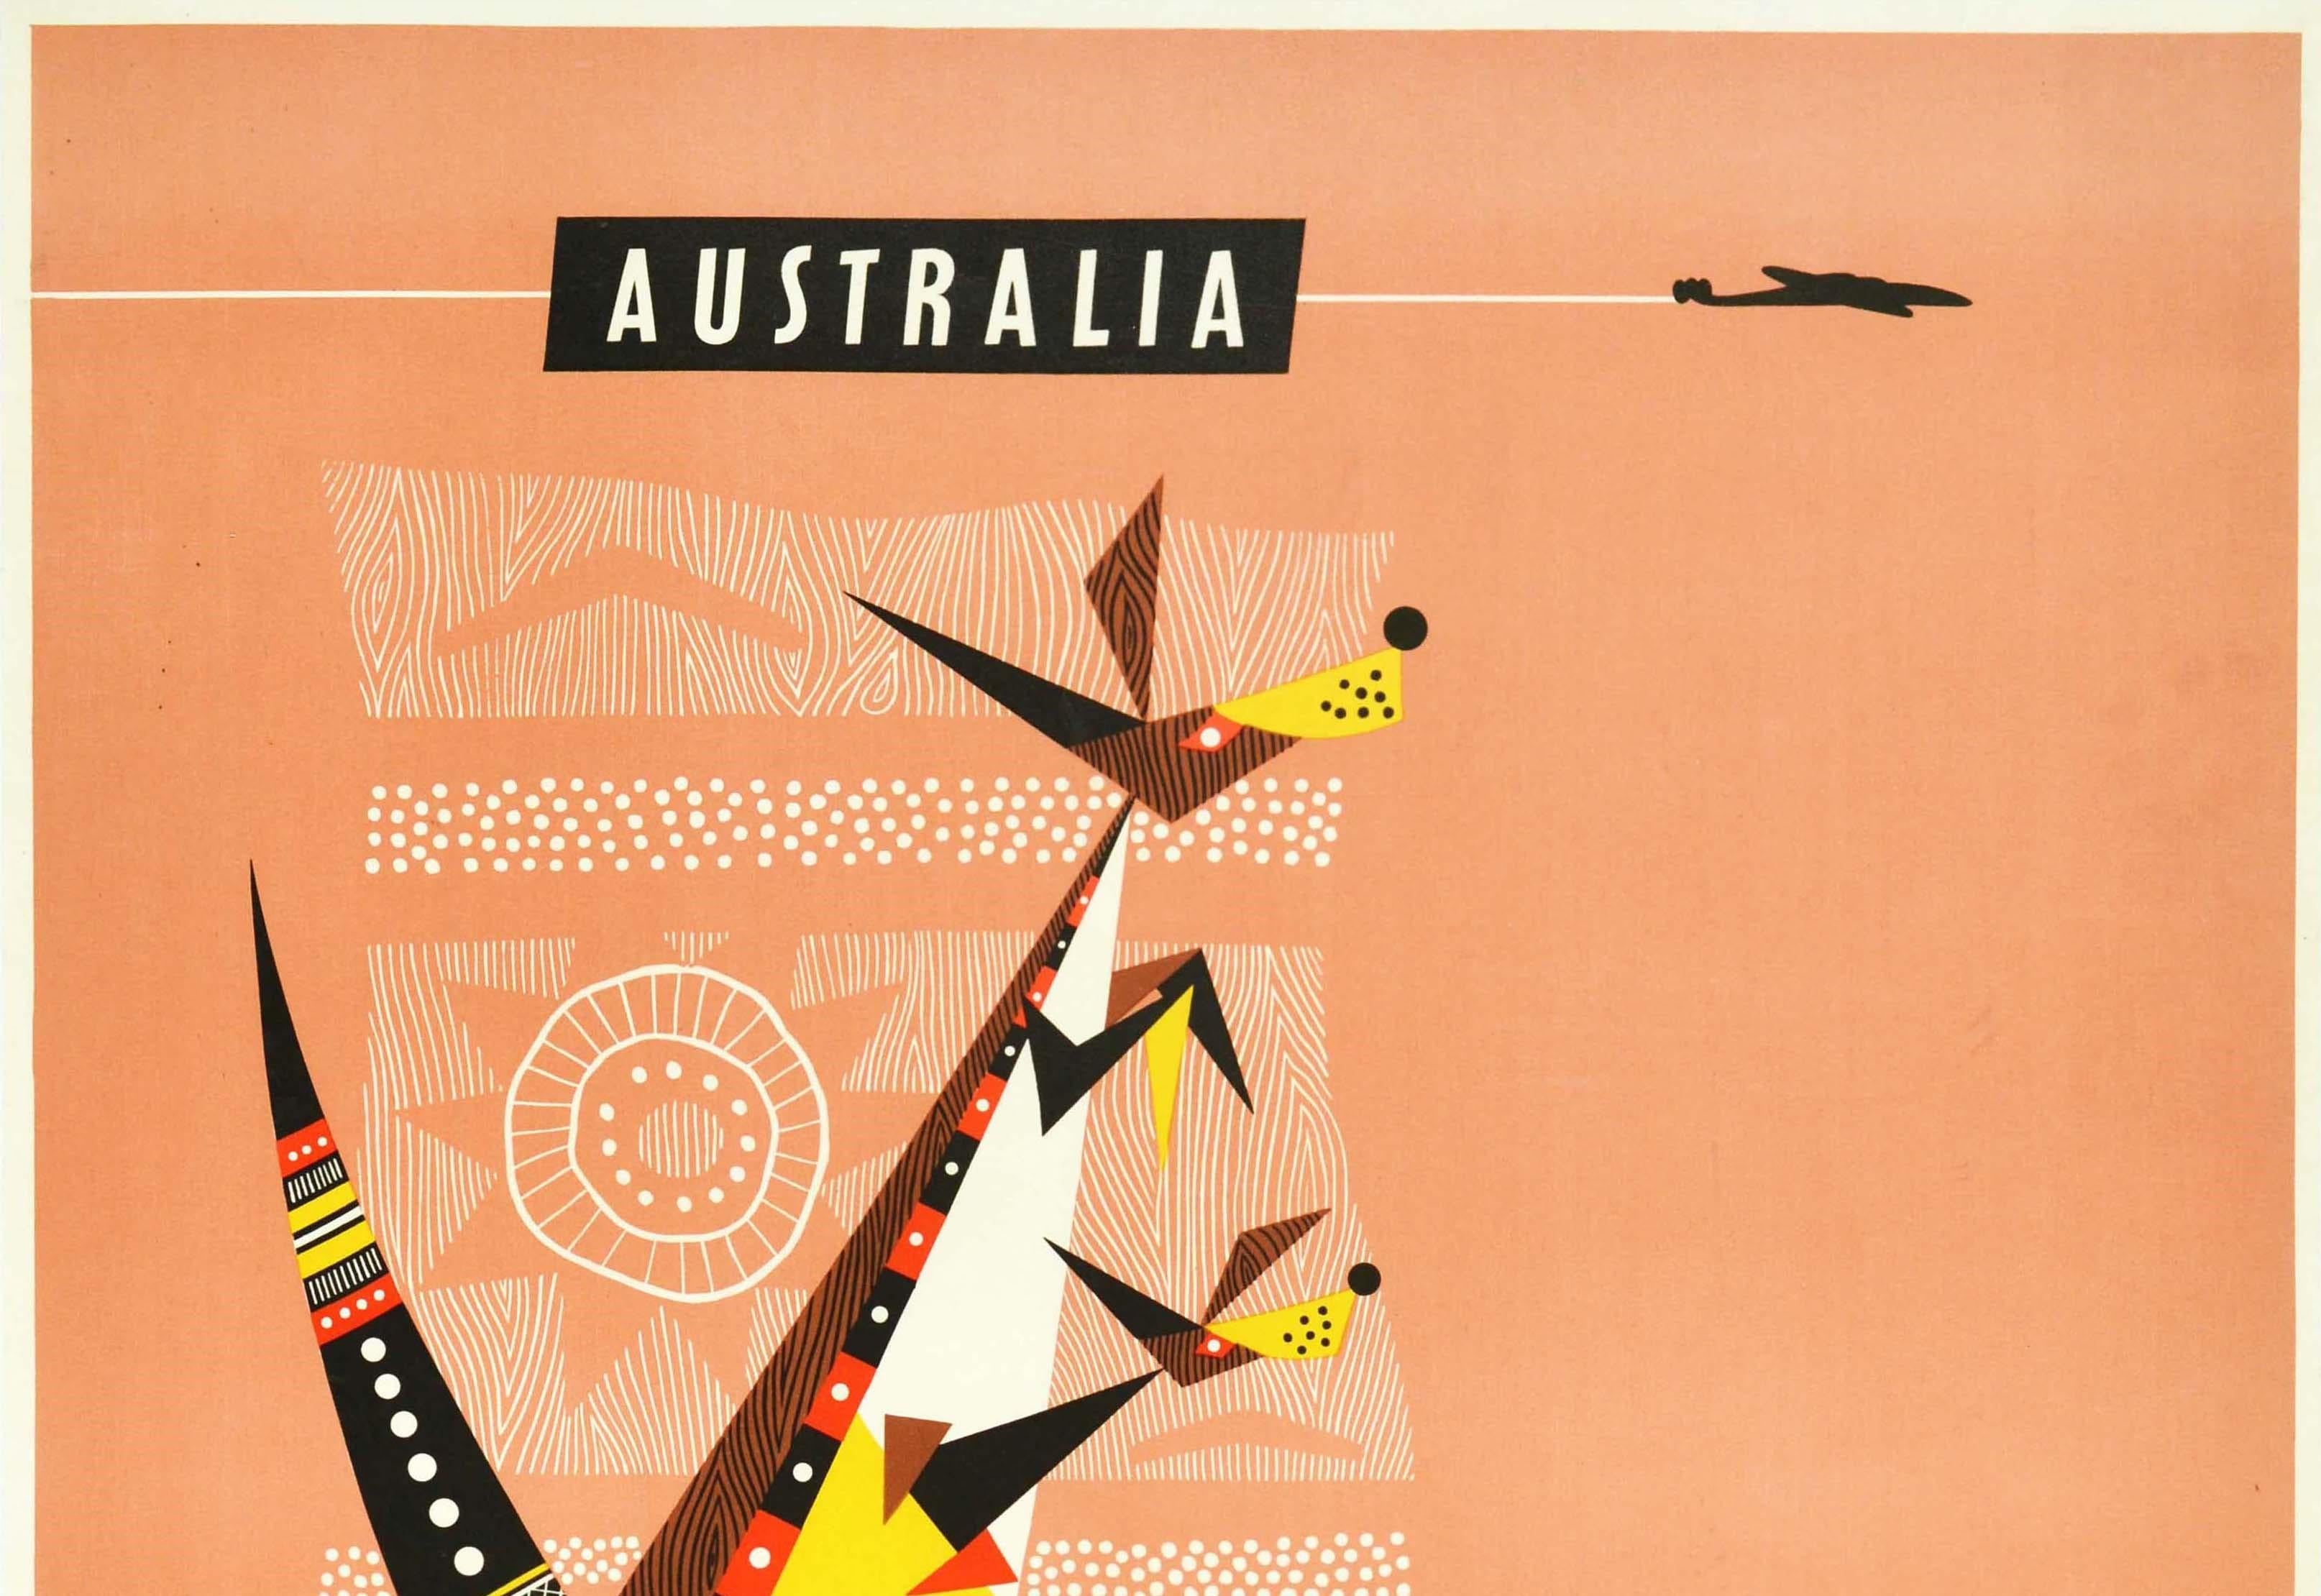 Original vintage travel poster for Australia by Qantas Australia's Overseas Airline in association with BOAC (British Overseas Airways Corporation) and TEAL (Tasman Empire Airways Limited) featuring a colourful aboriginal art style design by Harry